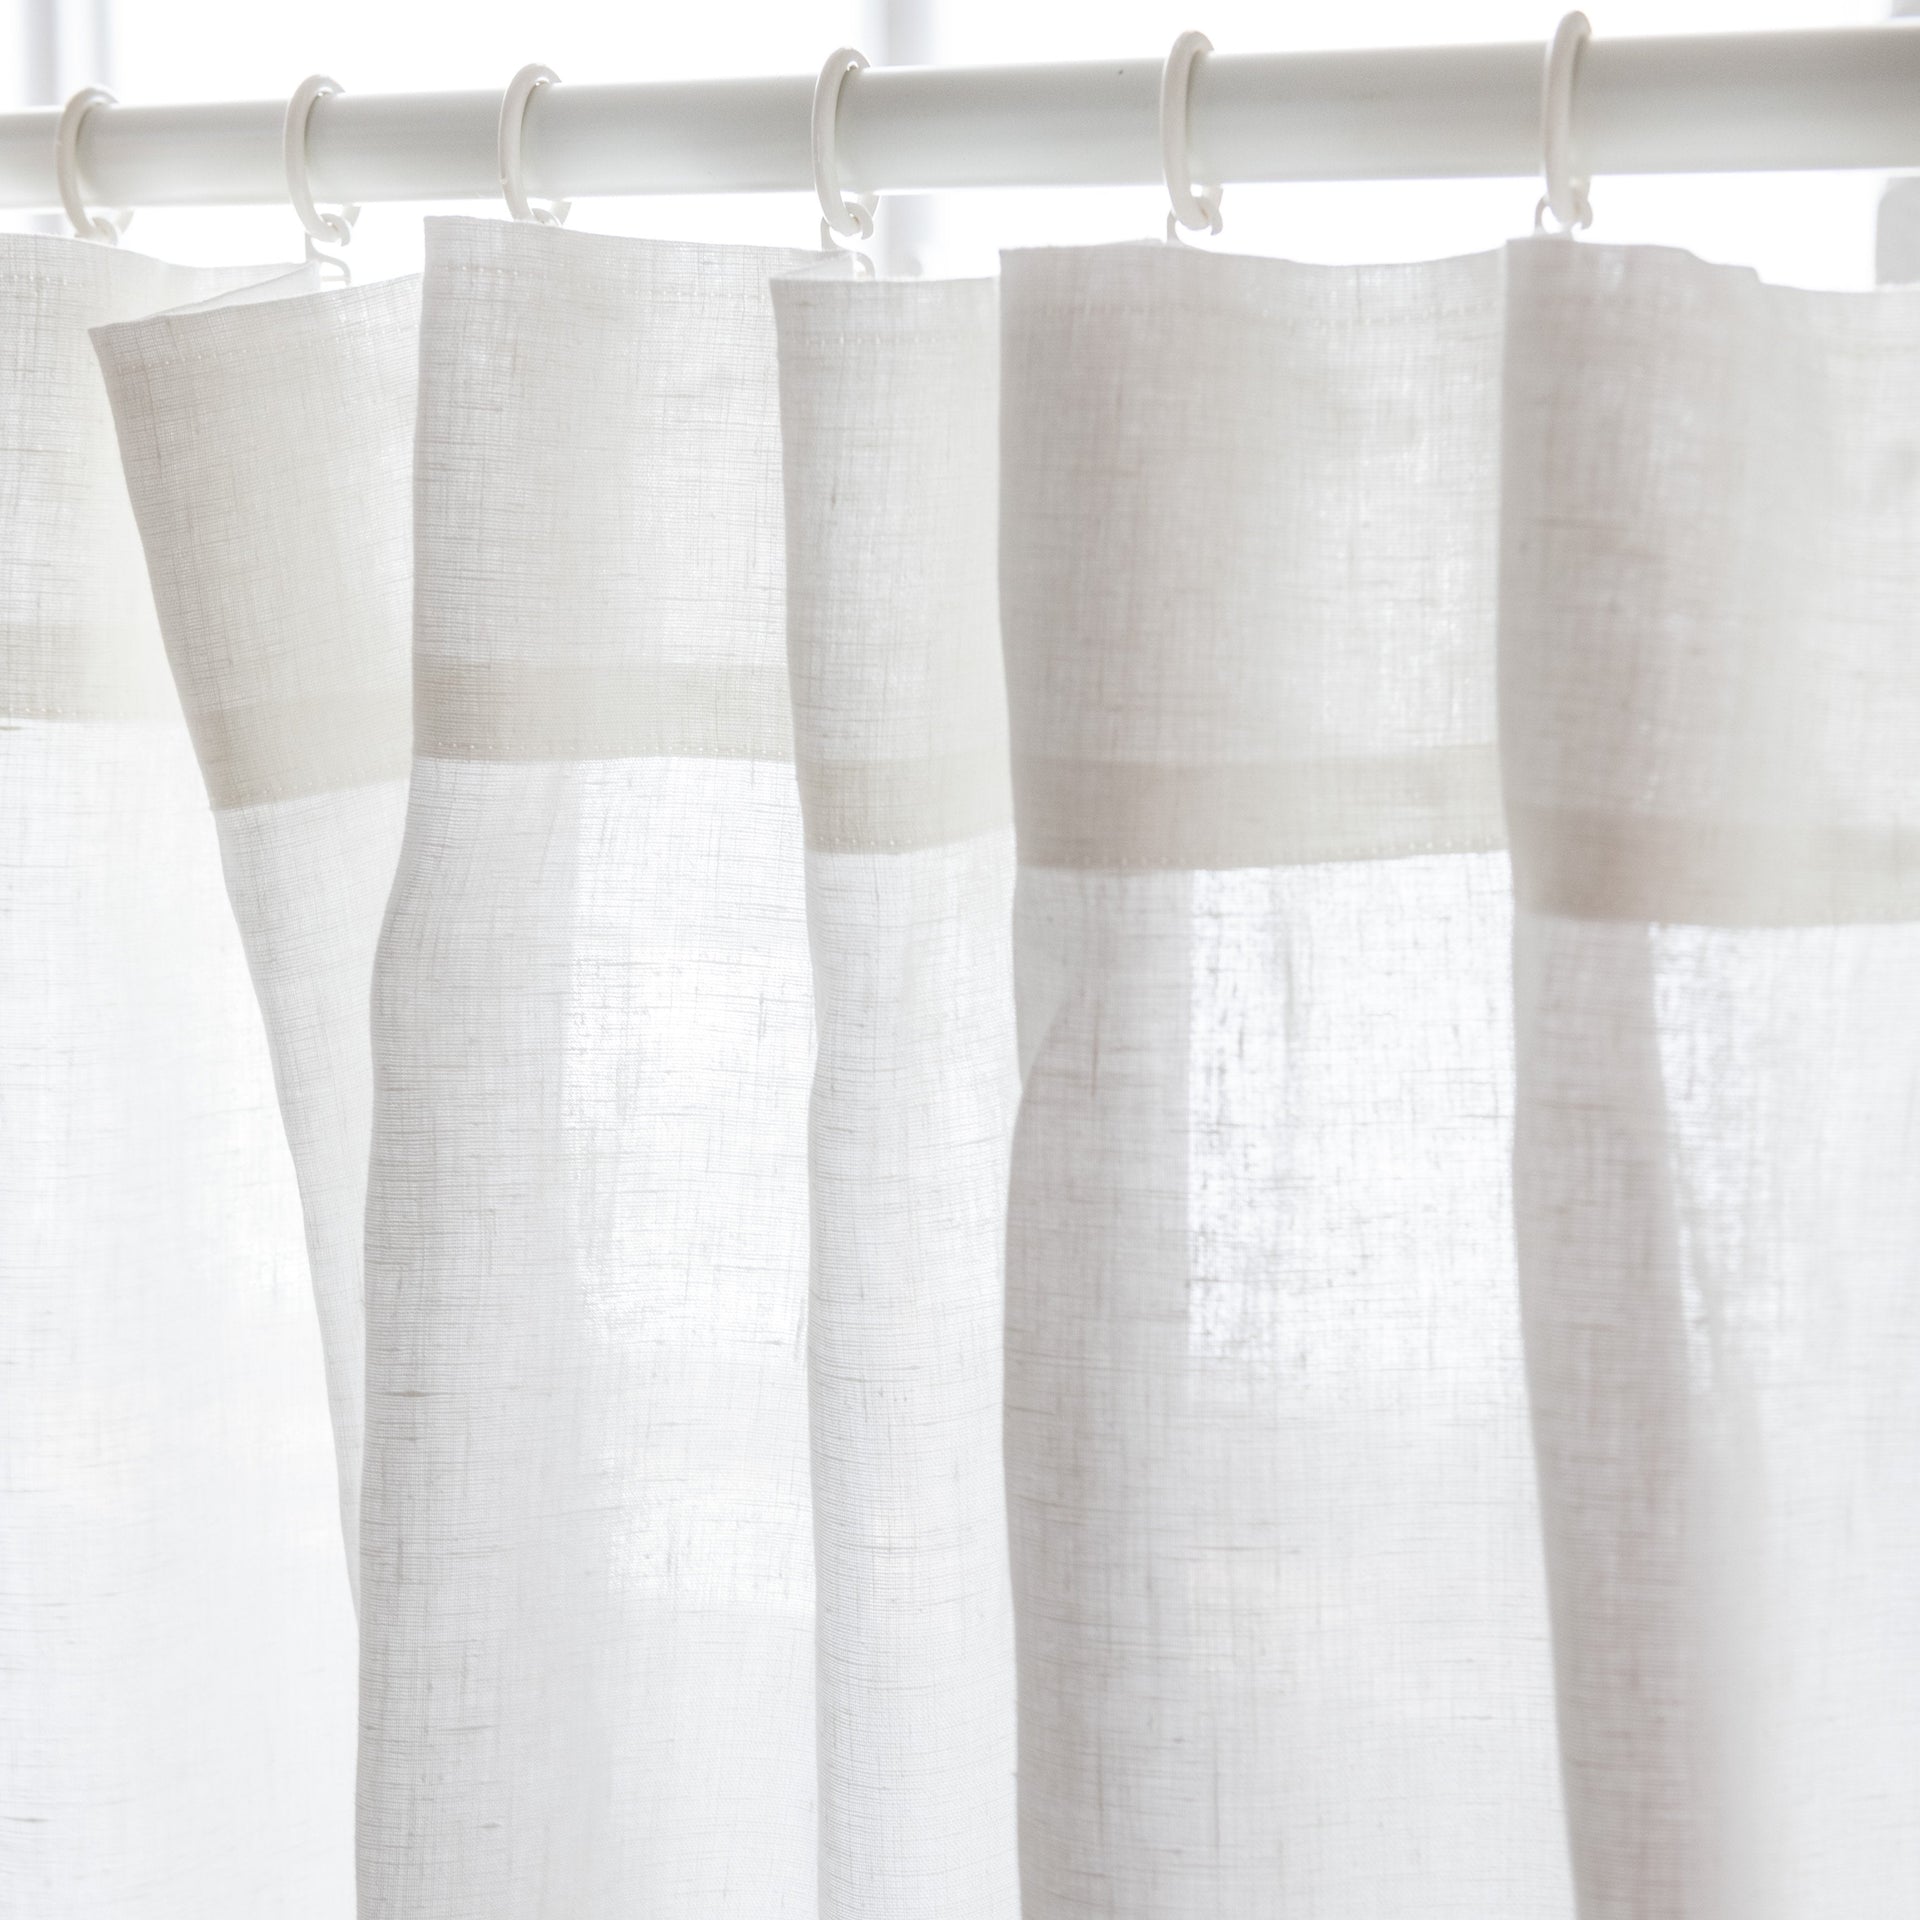 S-fold Linen Curtain Panel with Blackout Lining - Heading for Rings and Hooks - Linen Darkening Curtain